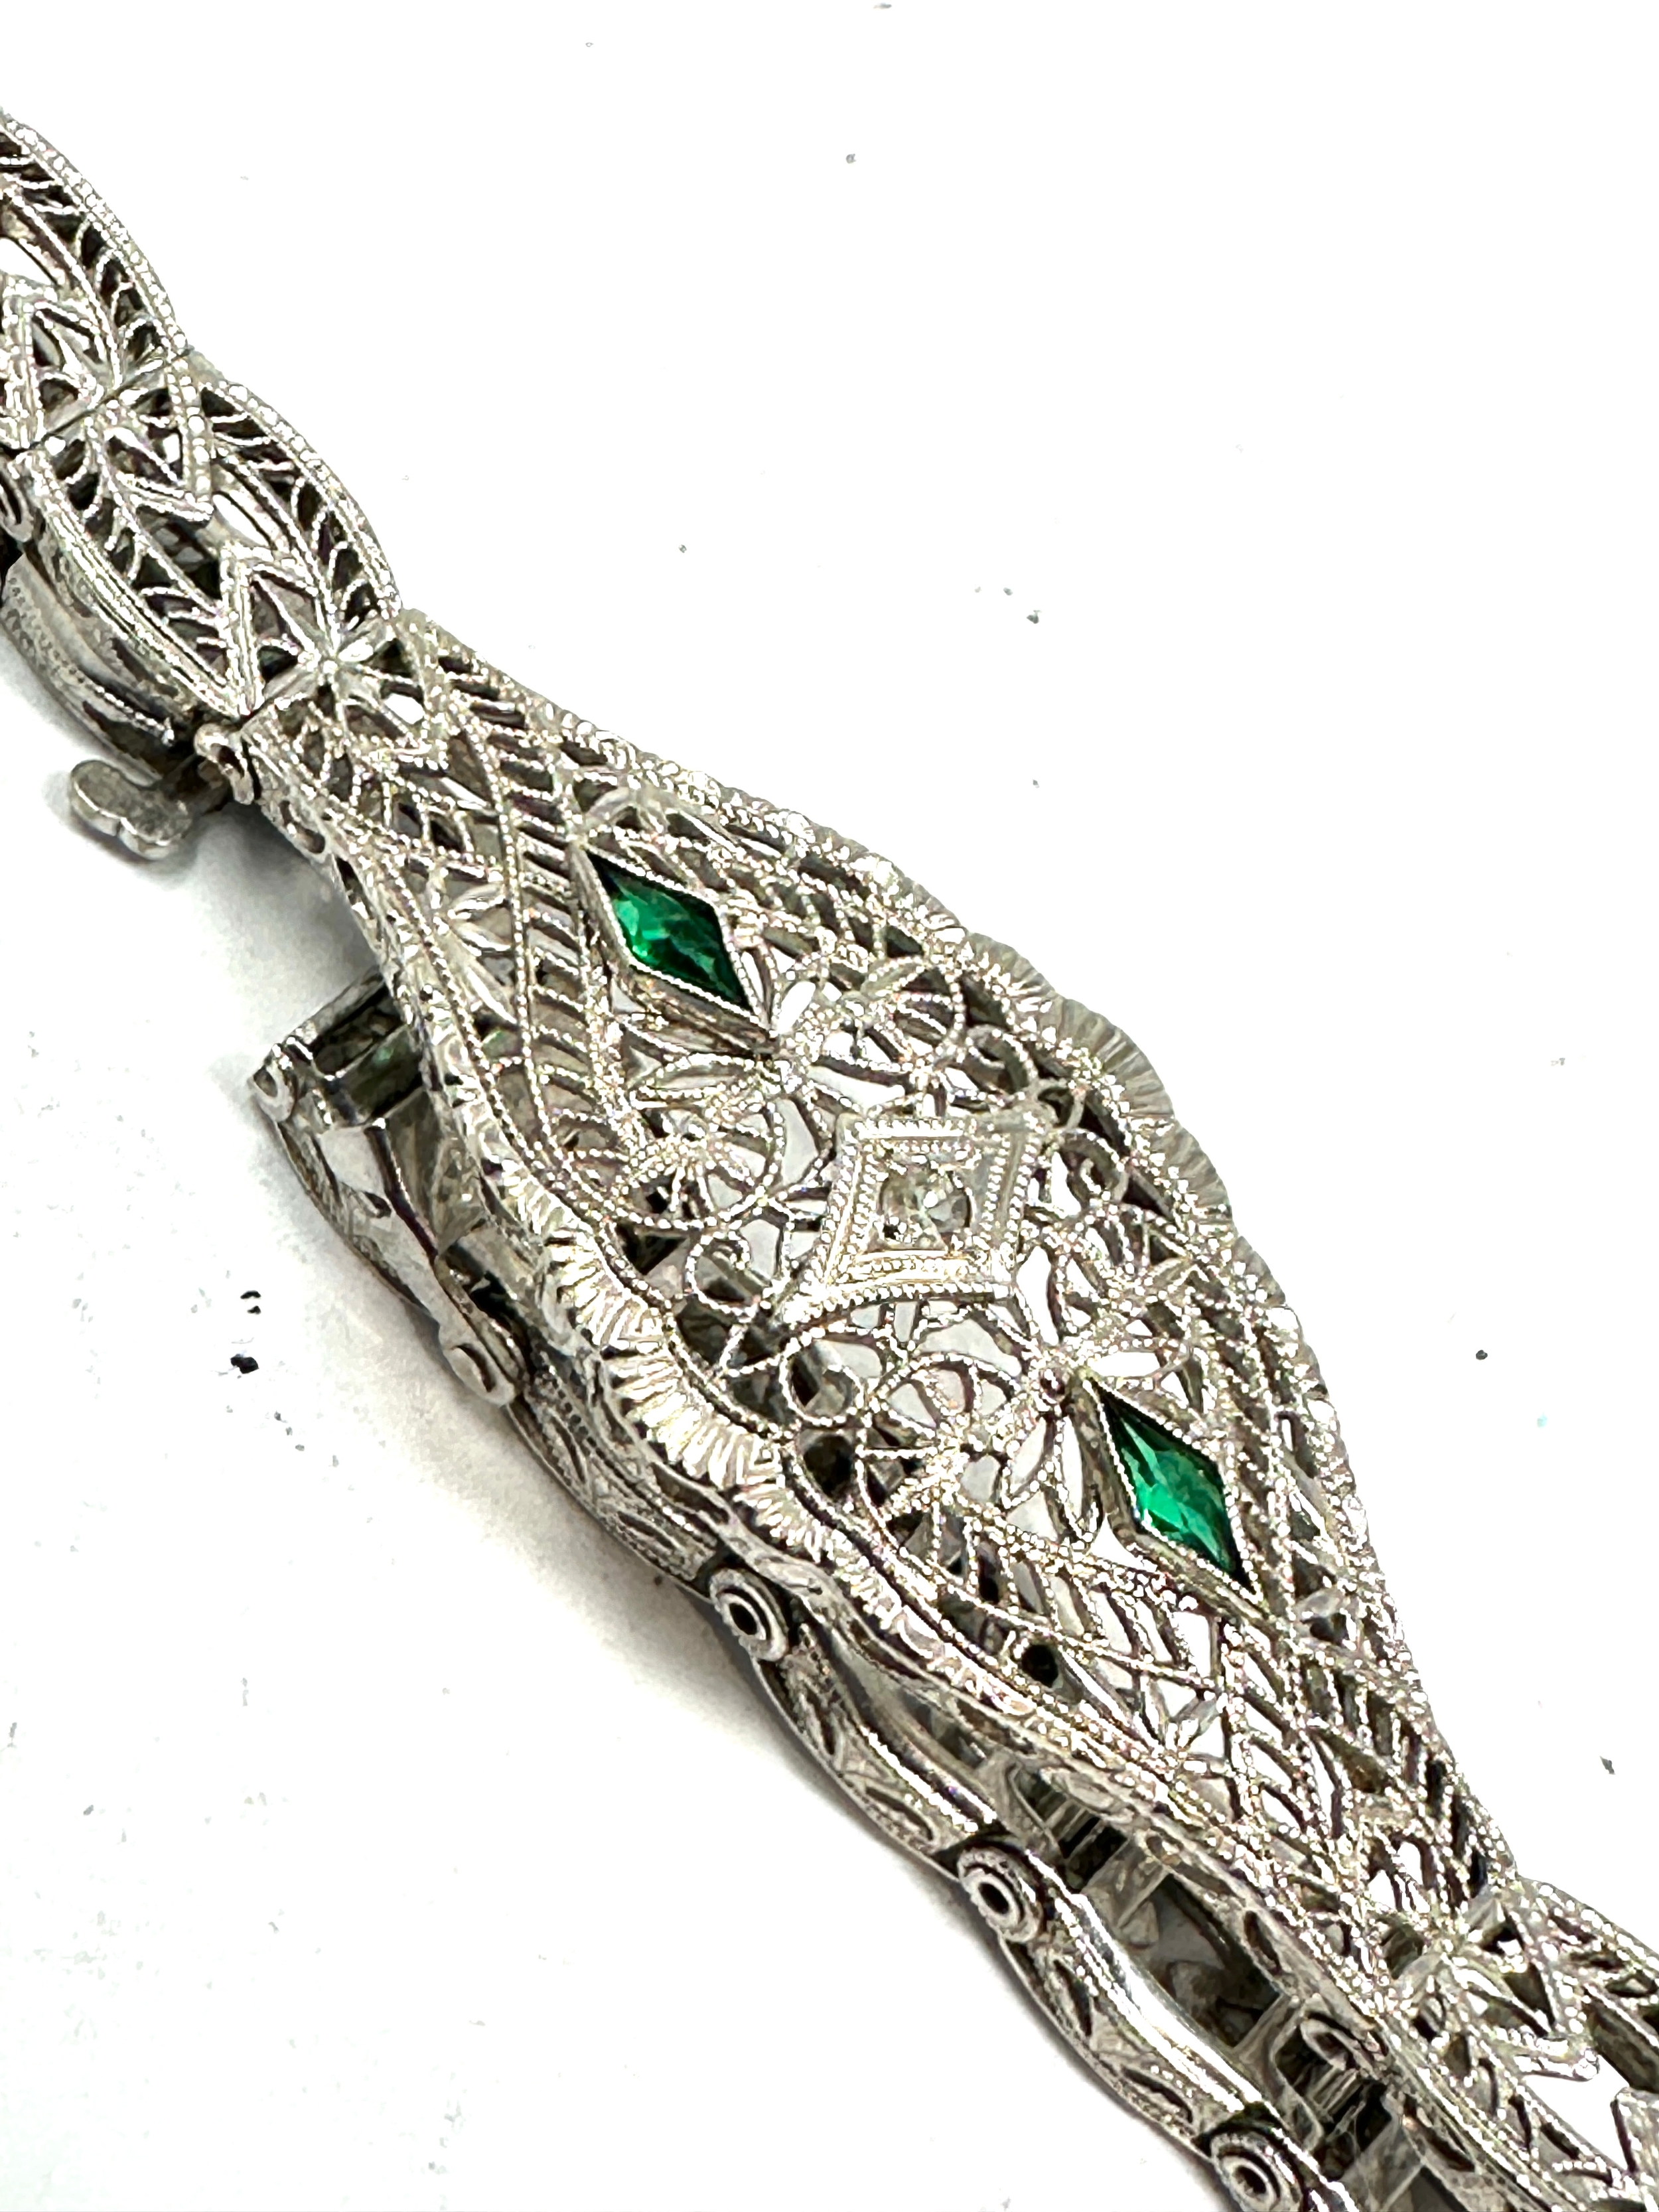 10ct white gold diamond & diopside bracelet weight 7.1g - Image 3 of 4